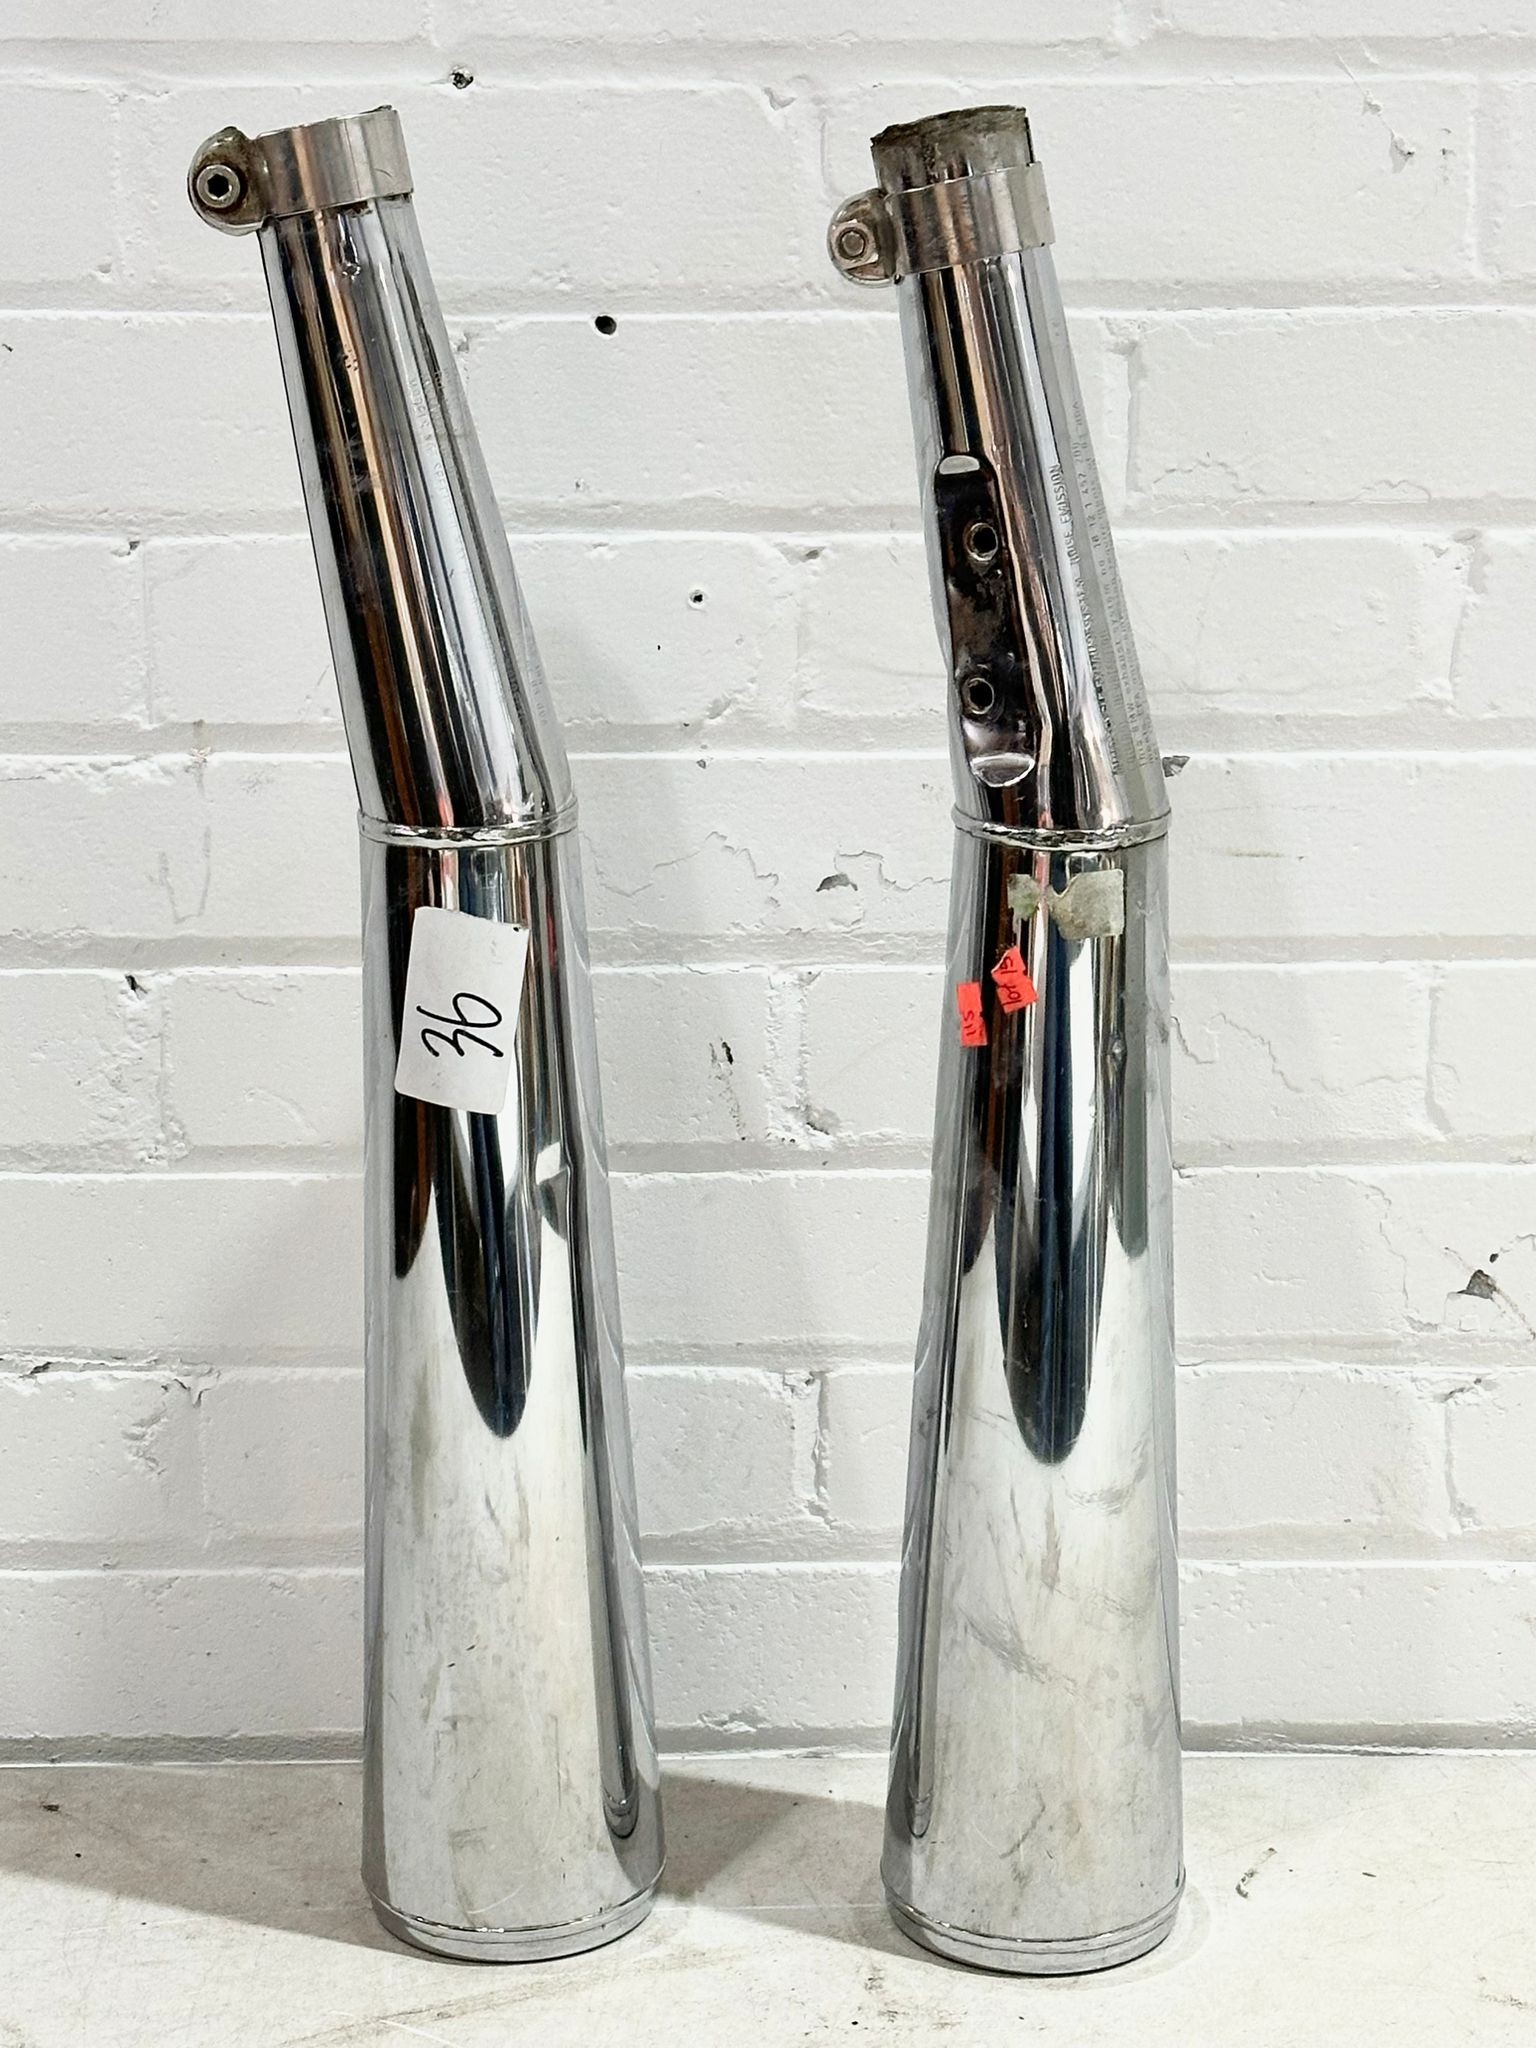 BMW R80 exhausts, stainless steel - Image 2 of 5